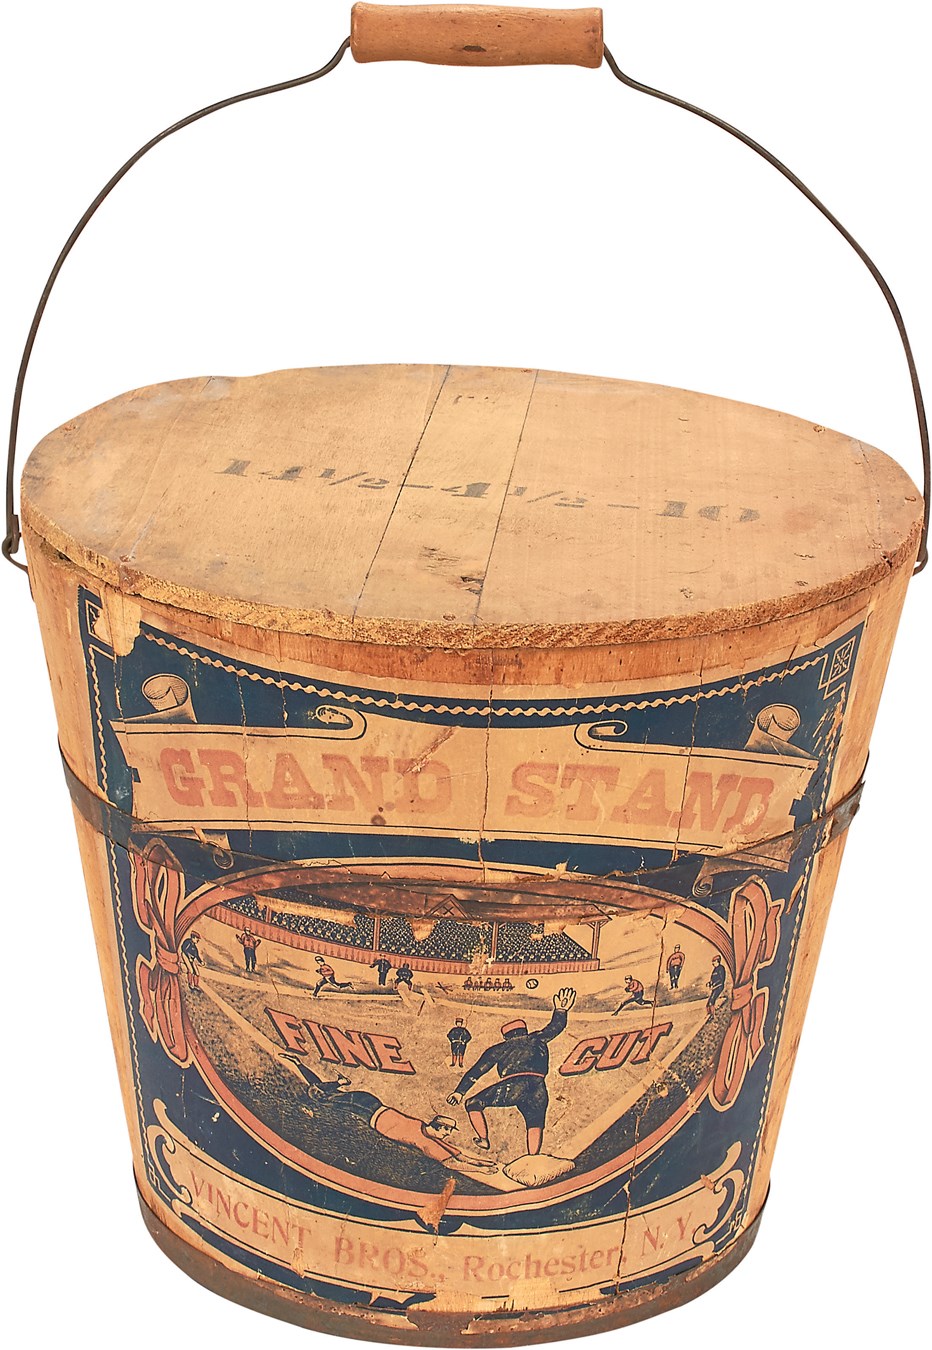 - Wonderful 19th Century "Grand Stand" Baseball Tobacco Bucket - Only One Known